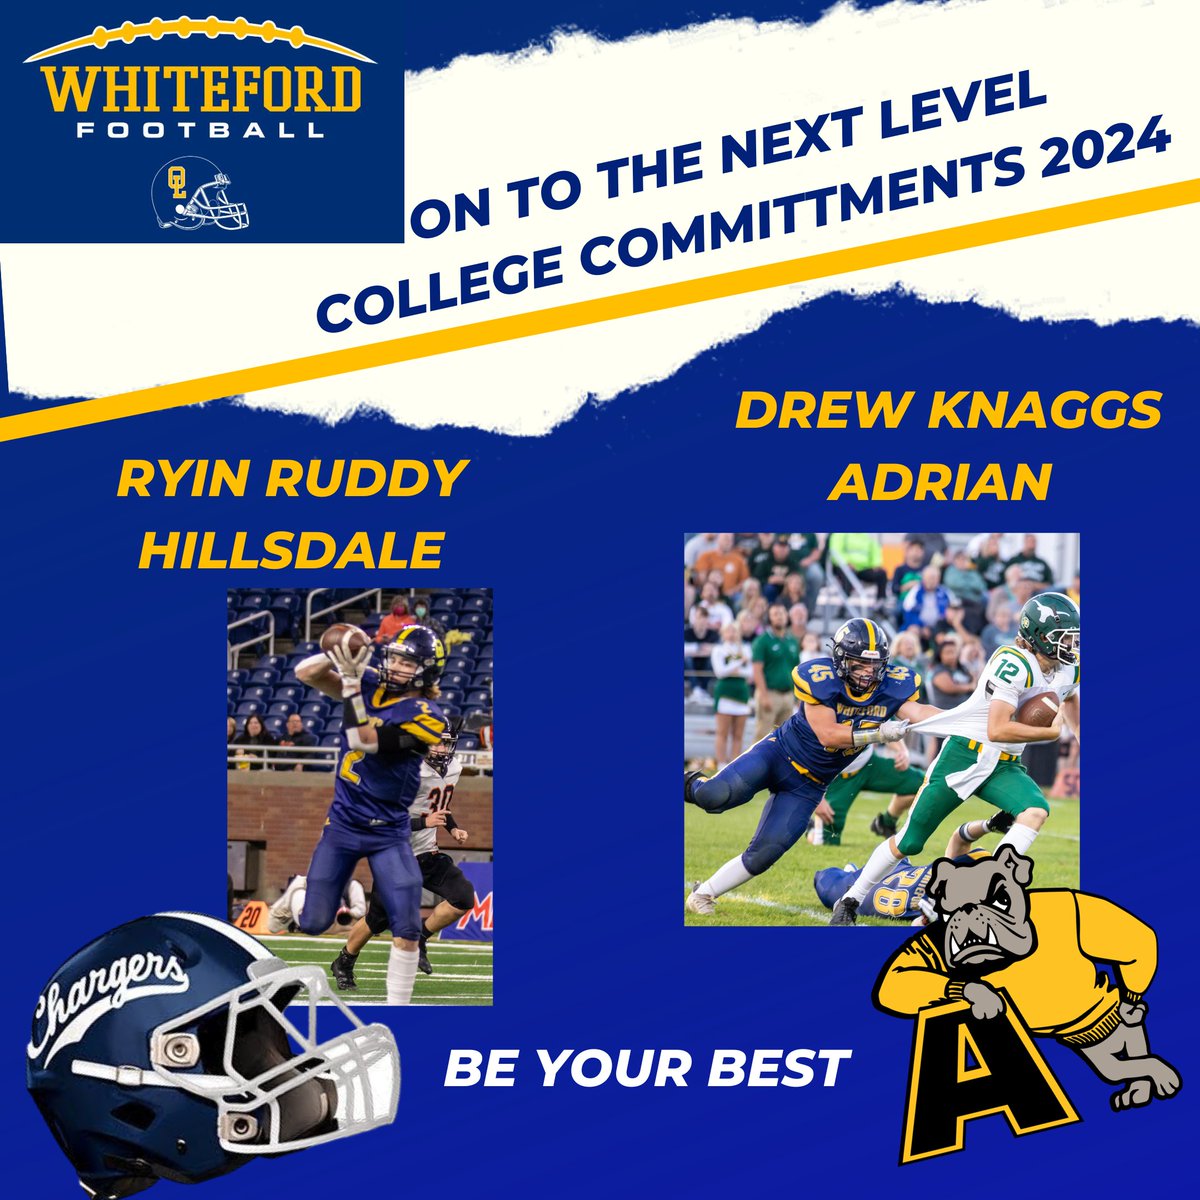 Congrats to @ryin_ruddy and @DrewKnaggs on their signing today.  Going to be great players at the next level.  #beyourbest #whitefordbrotherhood @MichFBFrenzy @TheD_Zone @MIexposure